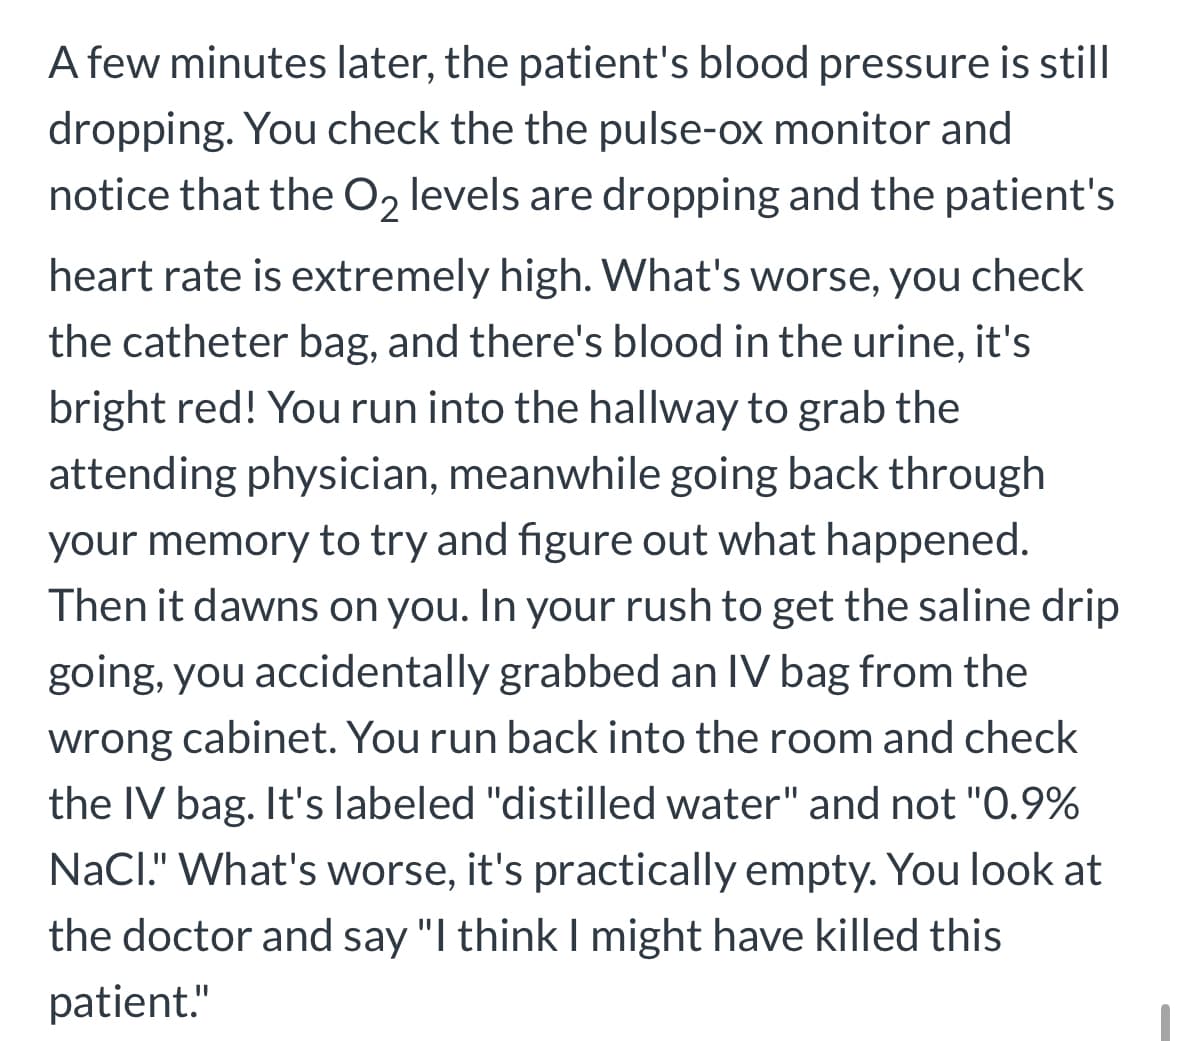 A few minutes later, the patient's blood pressure is still
dropping. You check the the pulse-ox monitor and
notice that the O₂ levels are dropping and the patient's
heart rate is extremely high. What's worse, you check
the catheter bag, and there's blood in the urine, it's
bright red! You run into the hallway to grab the
attending physician, meanwhile going back through
your memory to try and figure out what happened.
Then it dawns on you. In your rush to get the saline drip
going, you accidentally grabbed an IV bag from the
wrong cabinet. You run back into the room and check
the IV bag. It's labeled "distilled water" and not "0.9%
NaCl." What's worse, it's practically empty. You look at
the doctor and say "I think I might have killed this
patient."